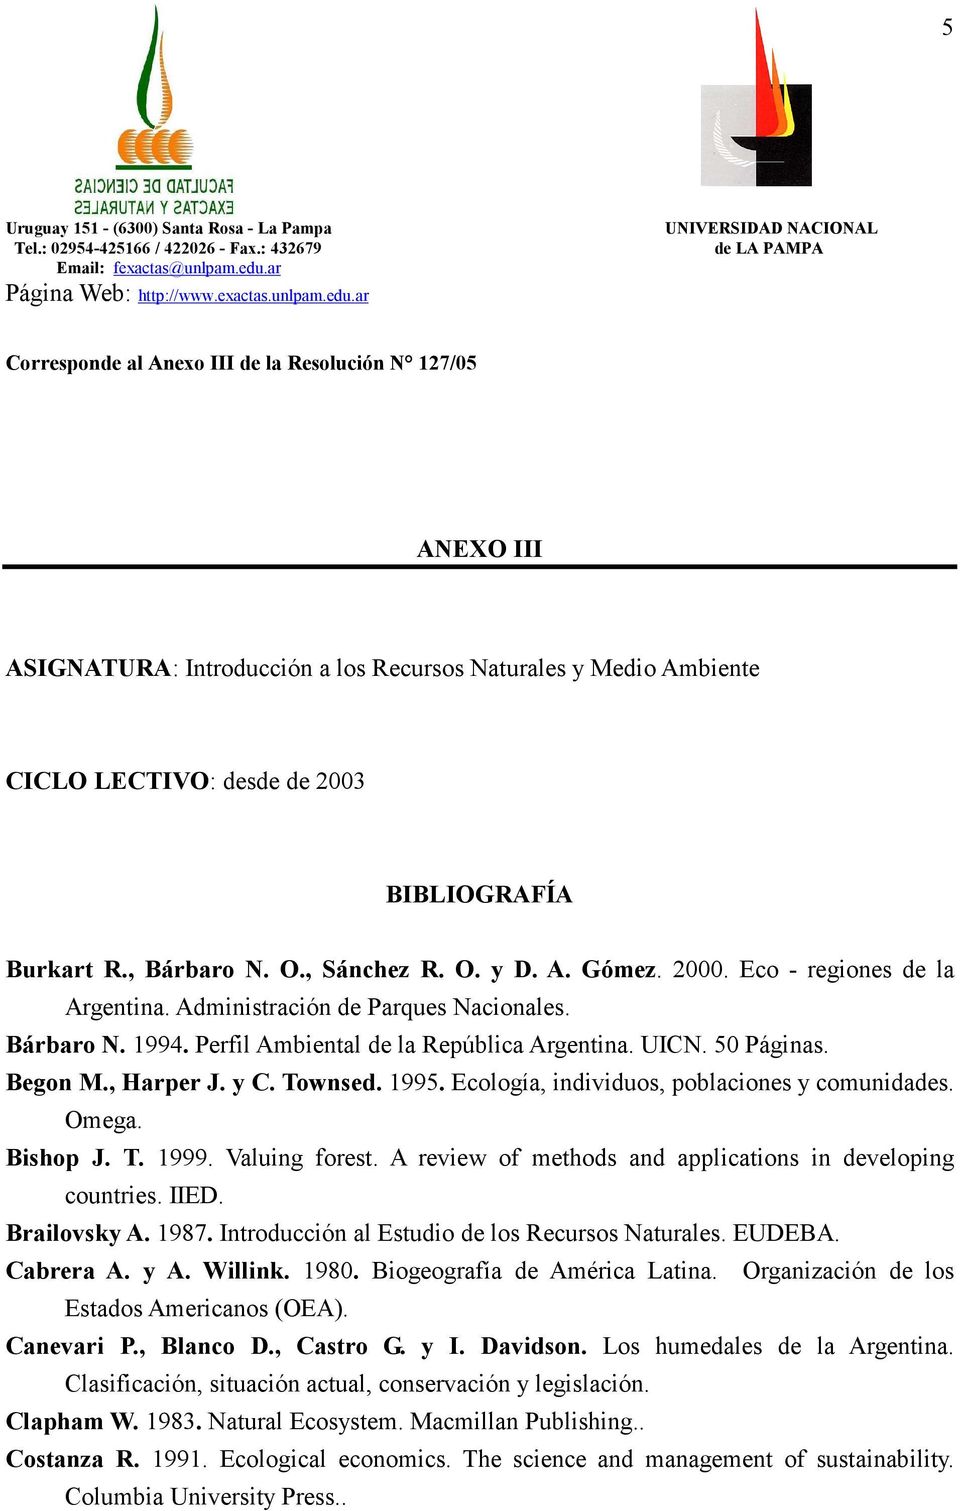 , Harper J. y C. Townsed. 1995. Ecología, individuos, poblaciones y comunidades. Omega. Bishop J. T. 1999. Valuing forest. A review of methods and applications in developing countries. IIED.